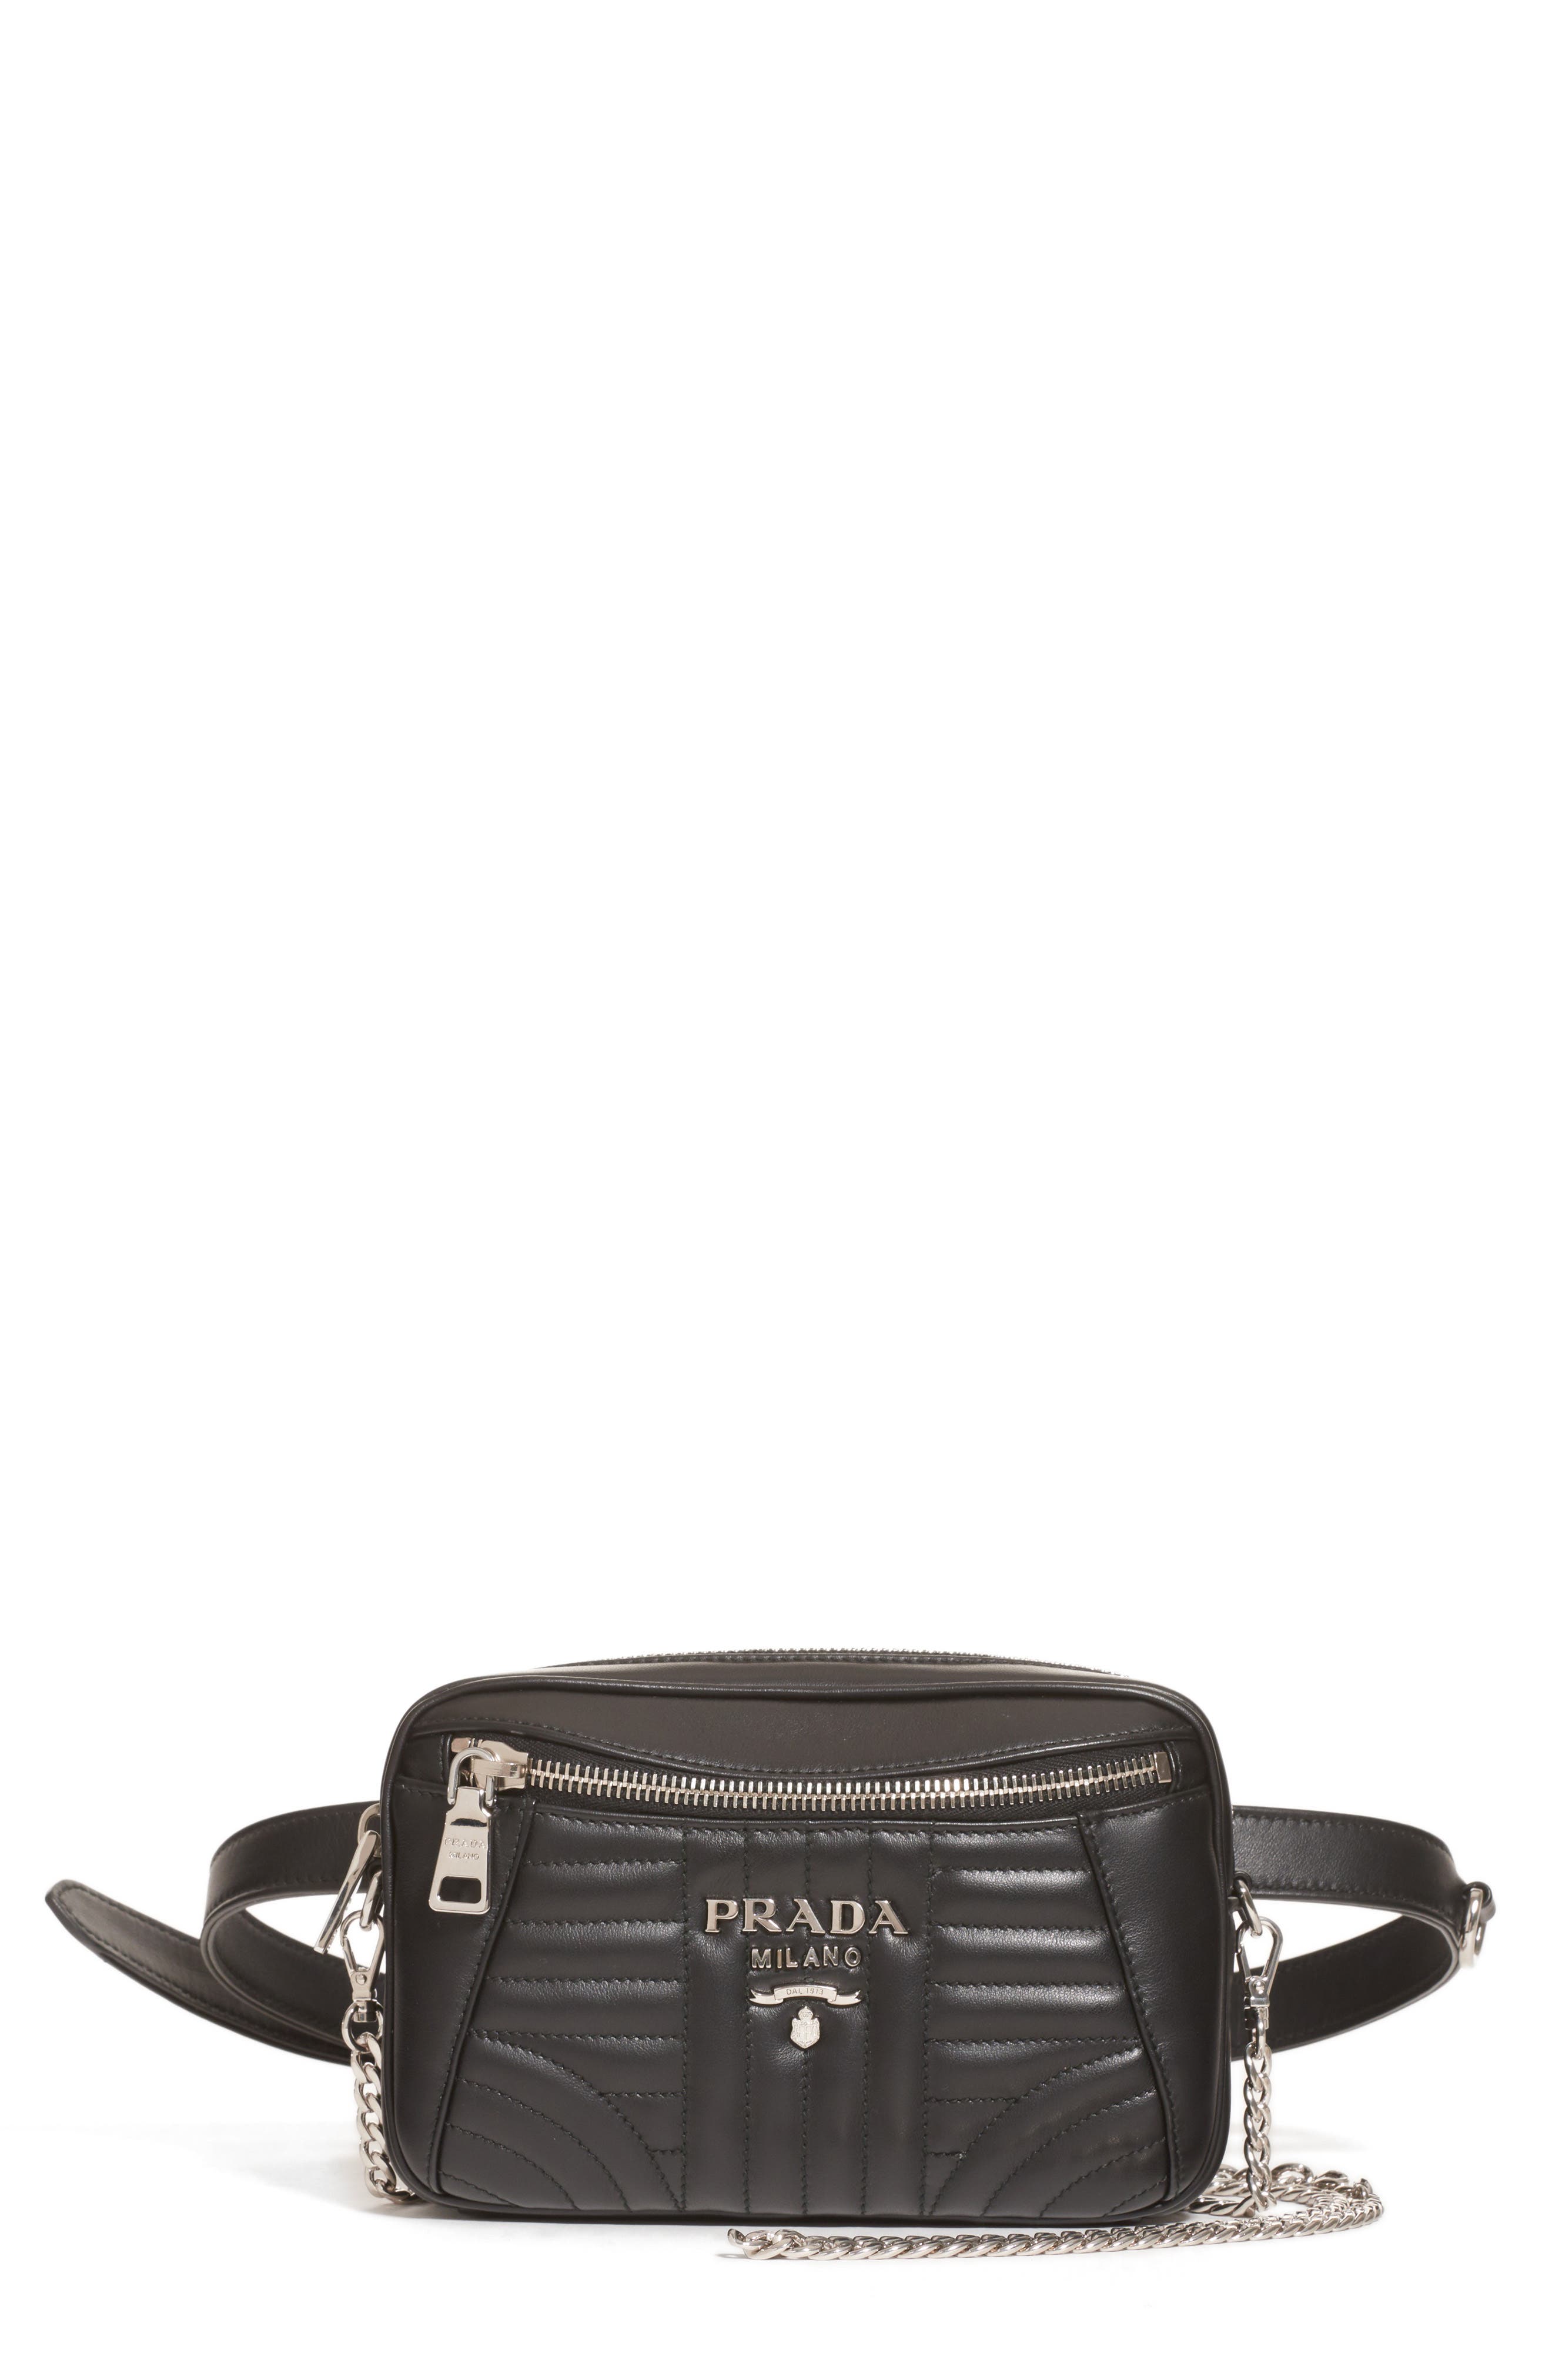 Prada Quilted Leather Convertible Belt 